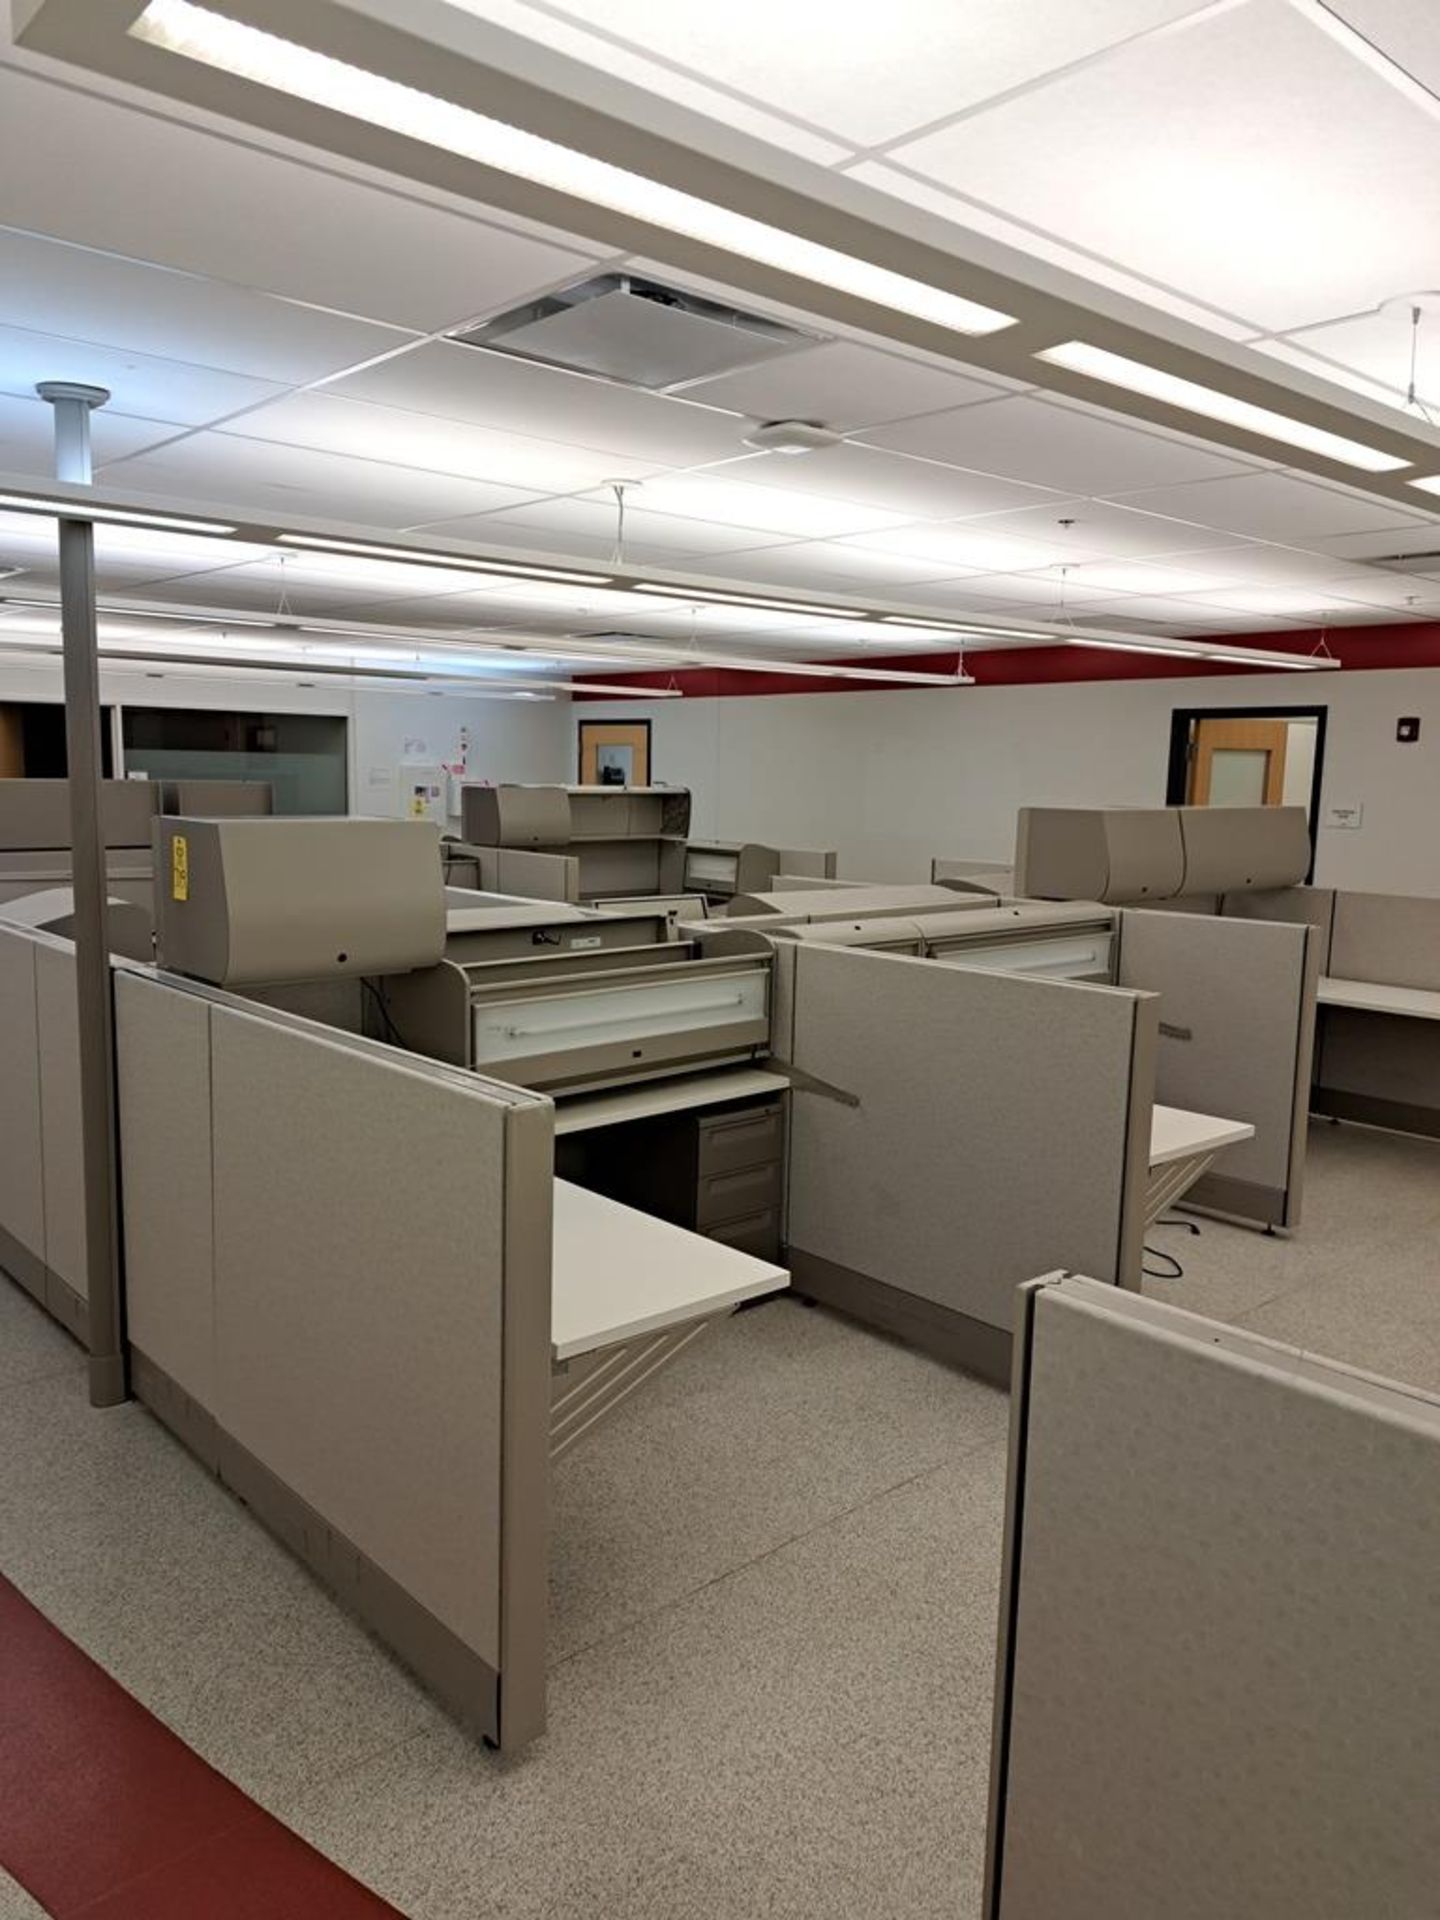 (6) Herman Miller Work Station Cubicles, 20' L X 150" W X 63" T, each cubie has desk, file cabinets, - Image 2 of 8